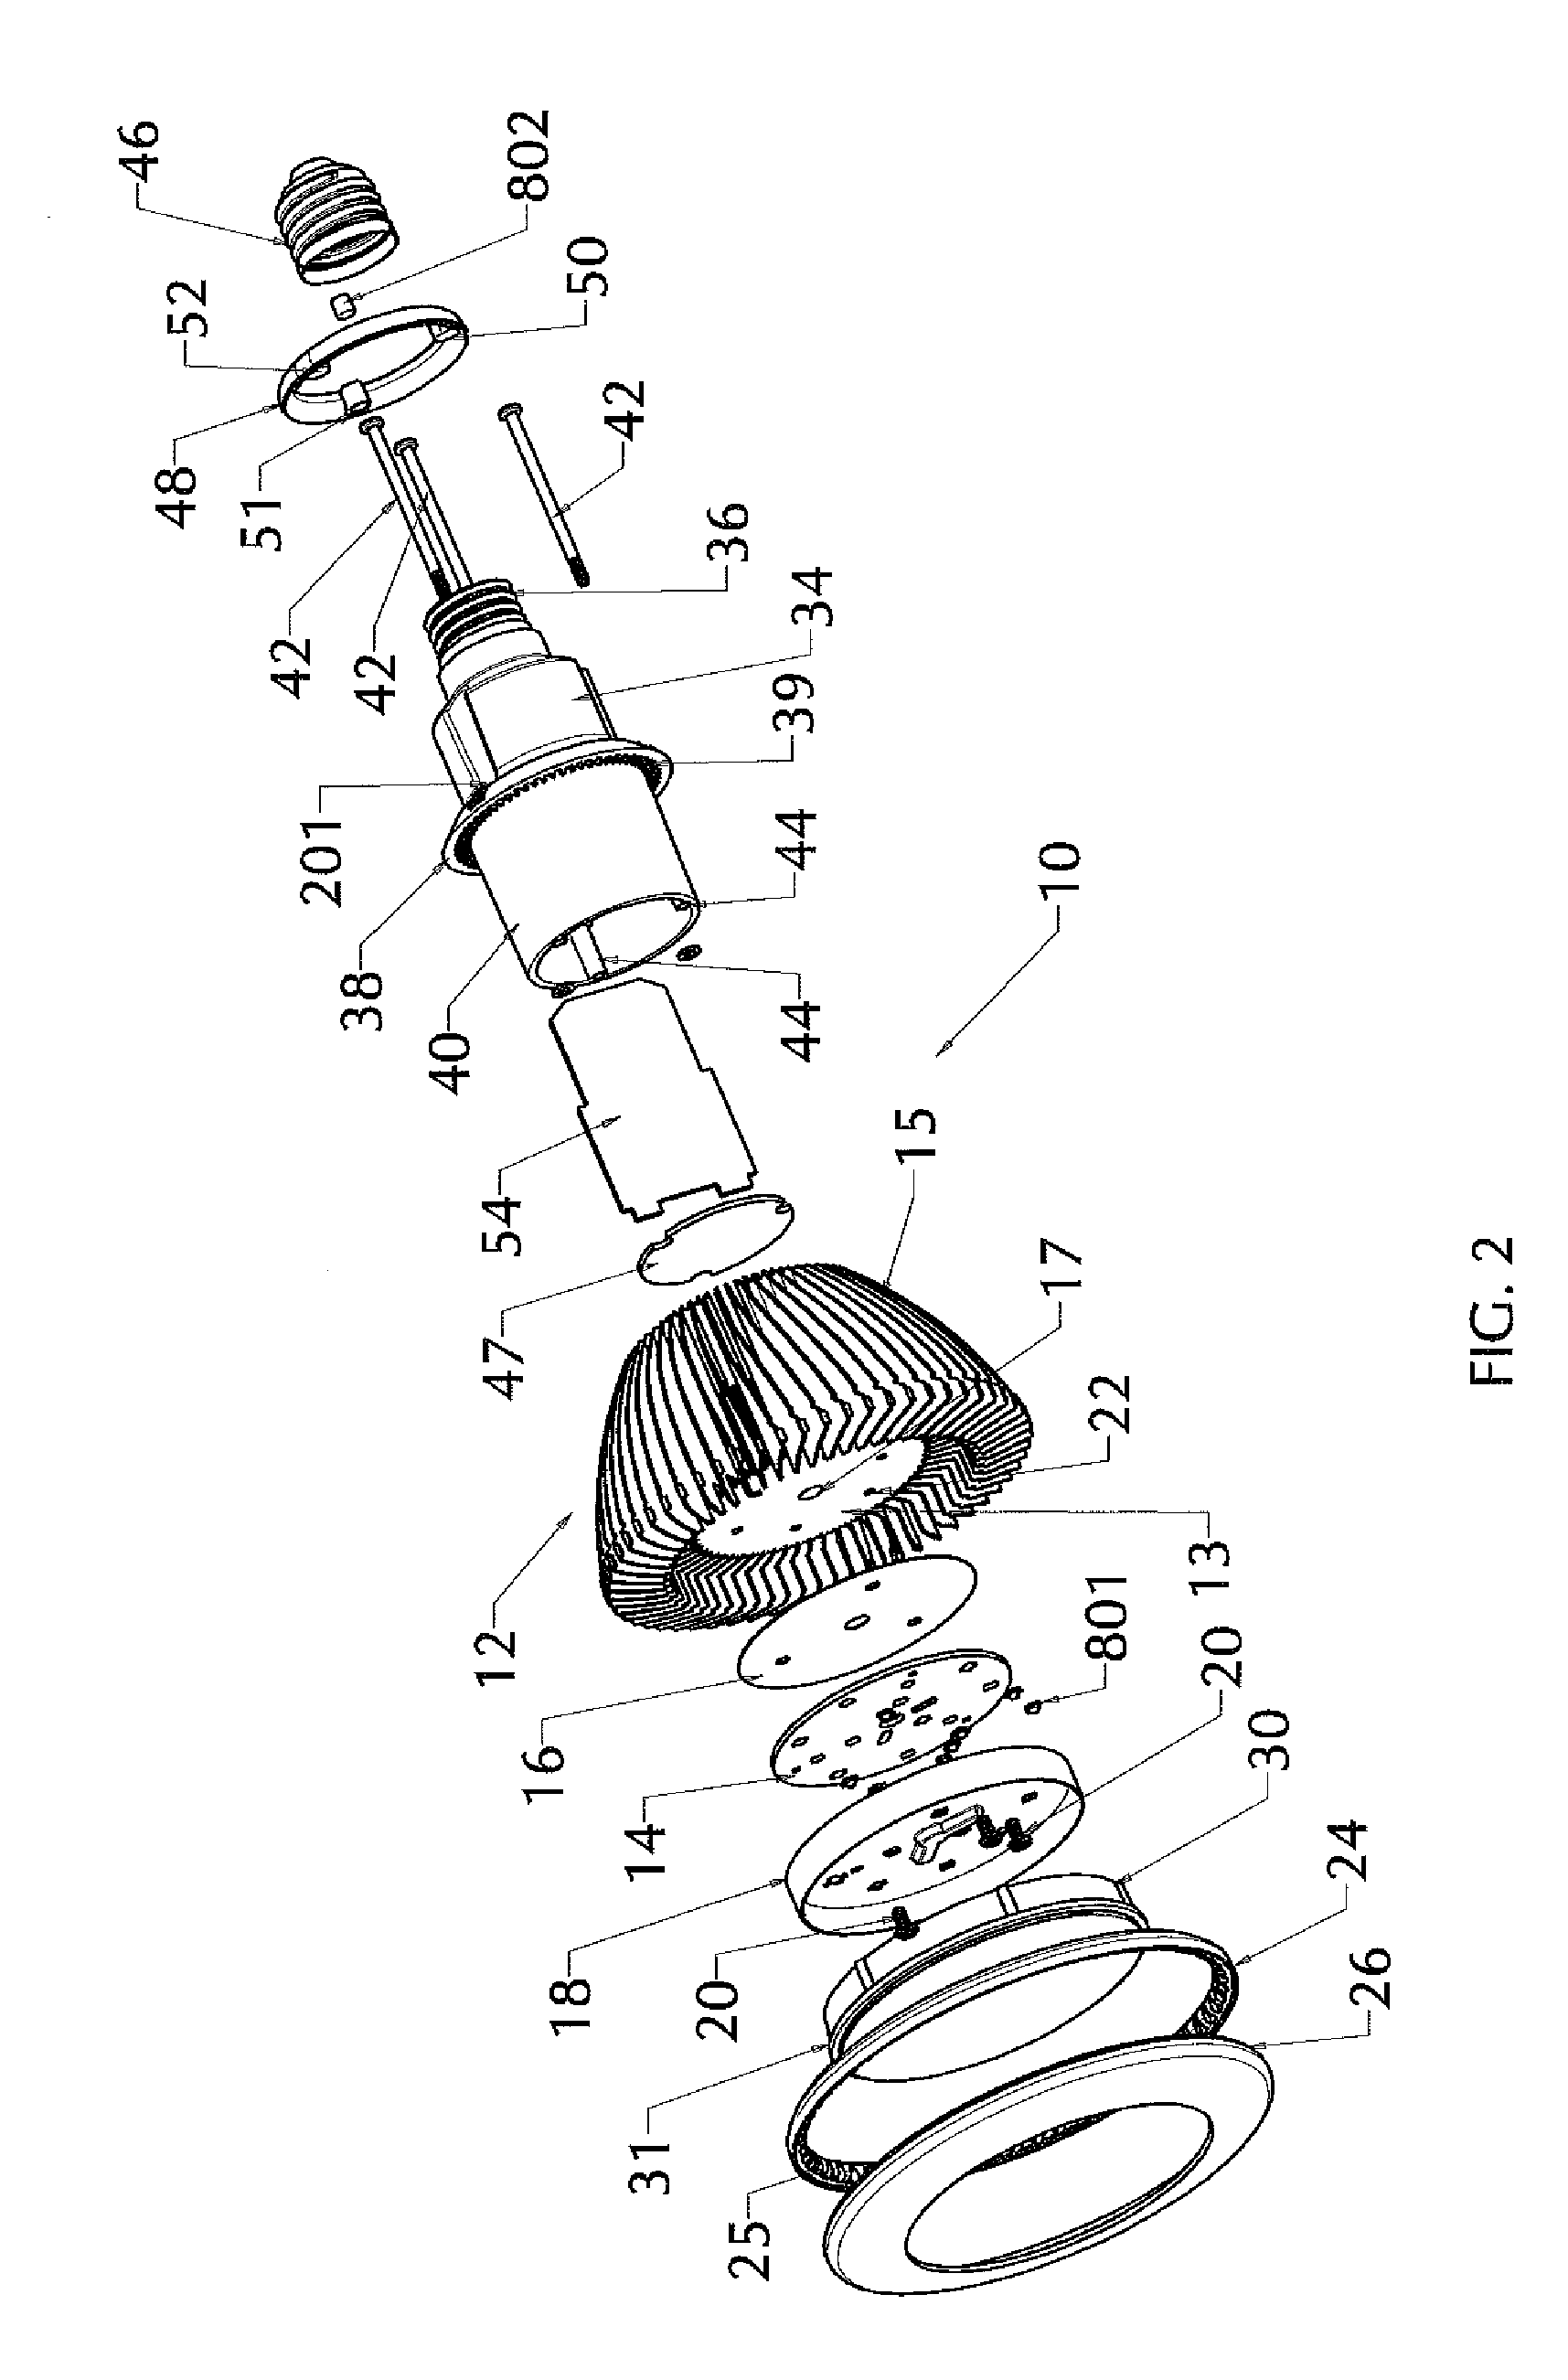 Replaceable lighting unit with adjustable output intensity and optional capability for reporting usage information, and method of operating same